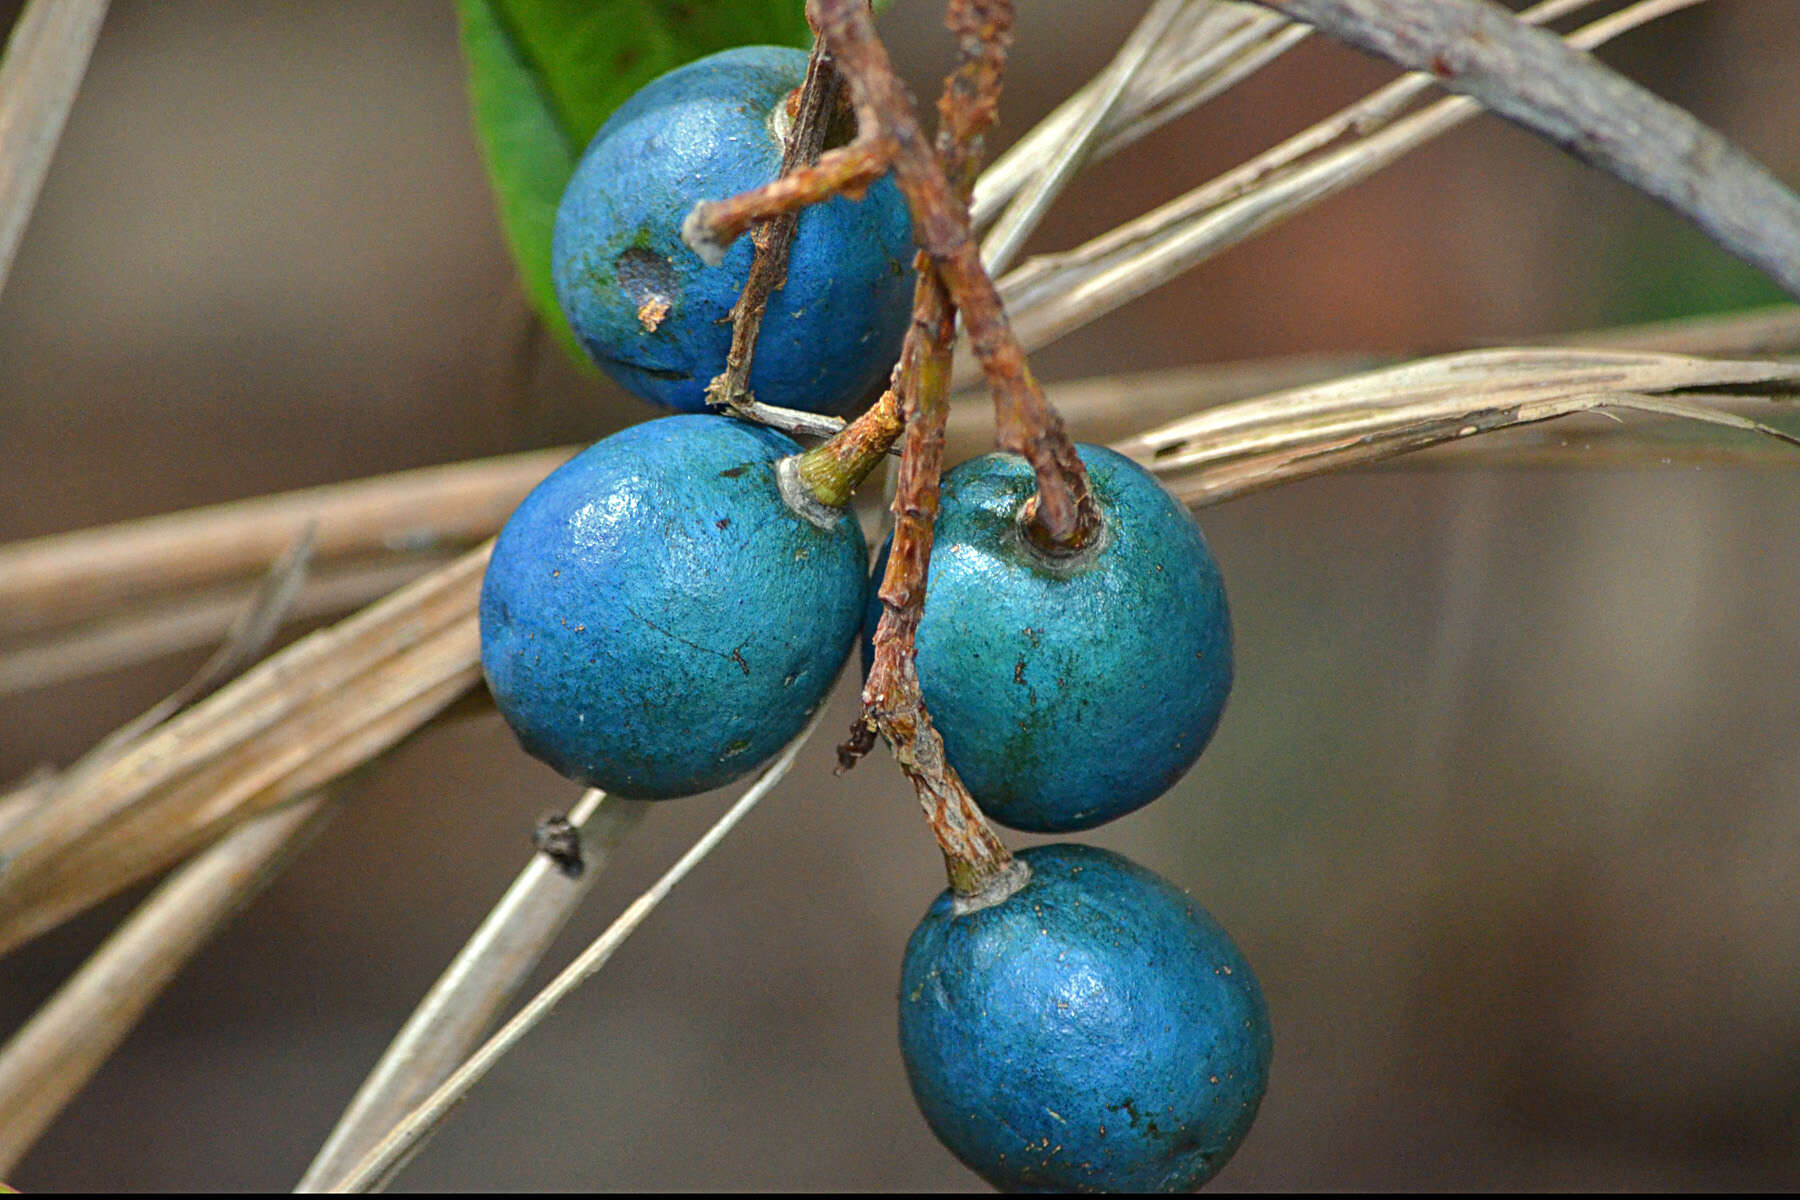 Image of quandong